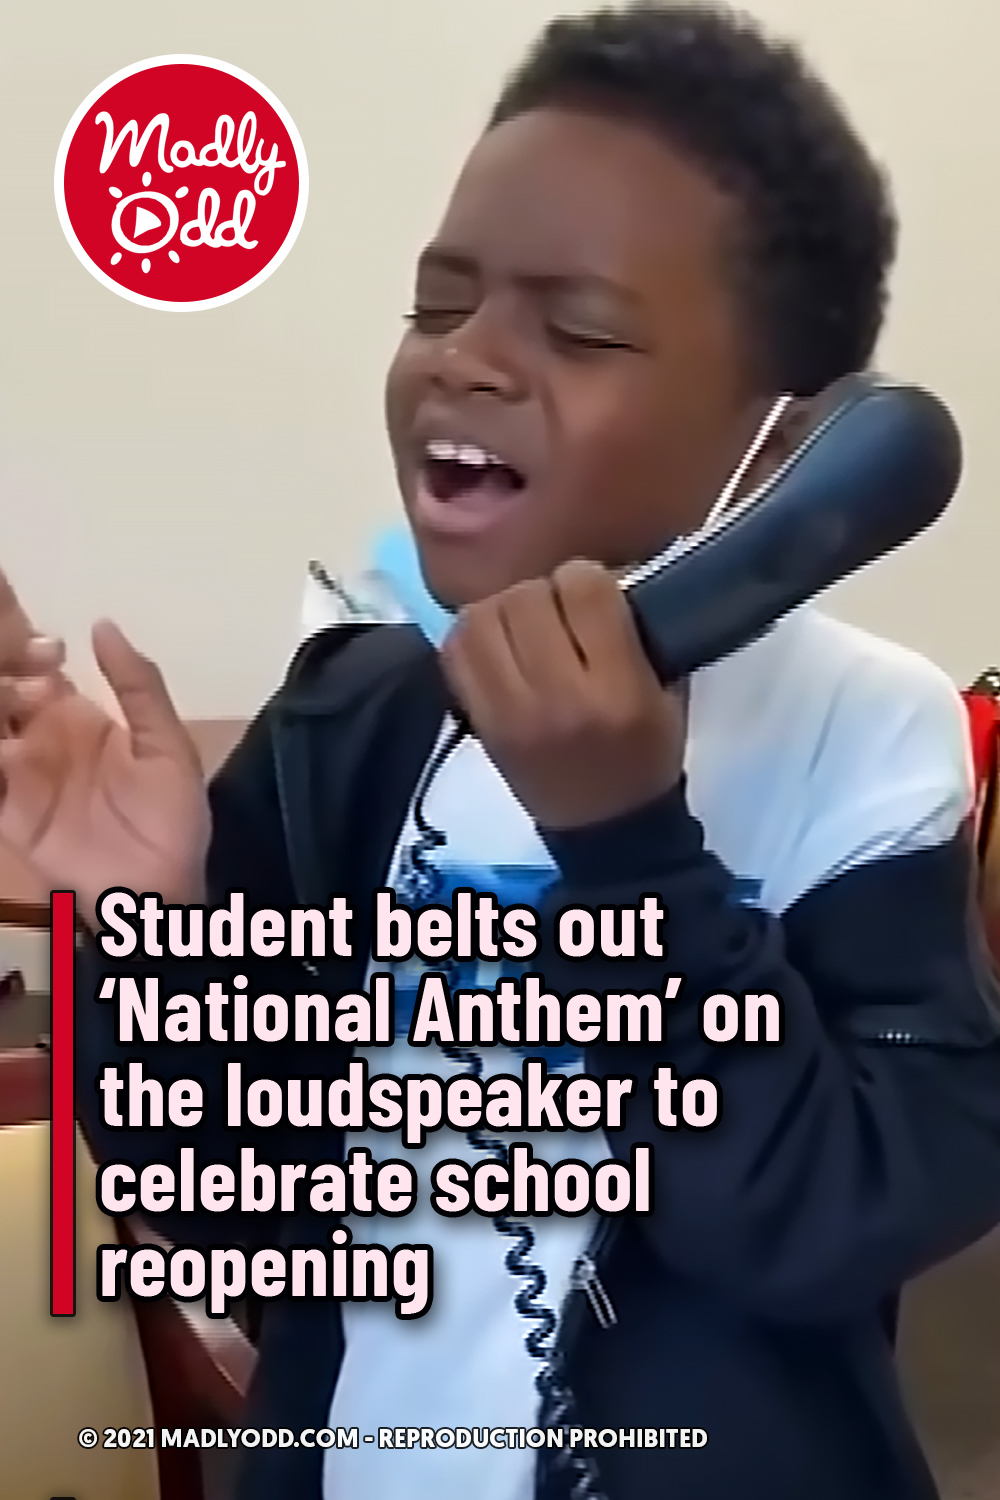 Student belts out ‘National Anthem’ on the loudspeaker to celebrate school reopening